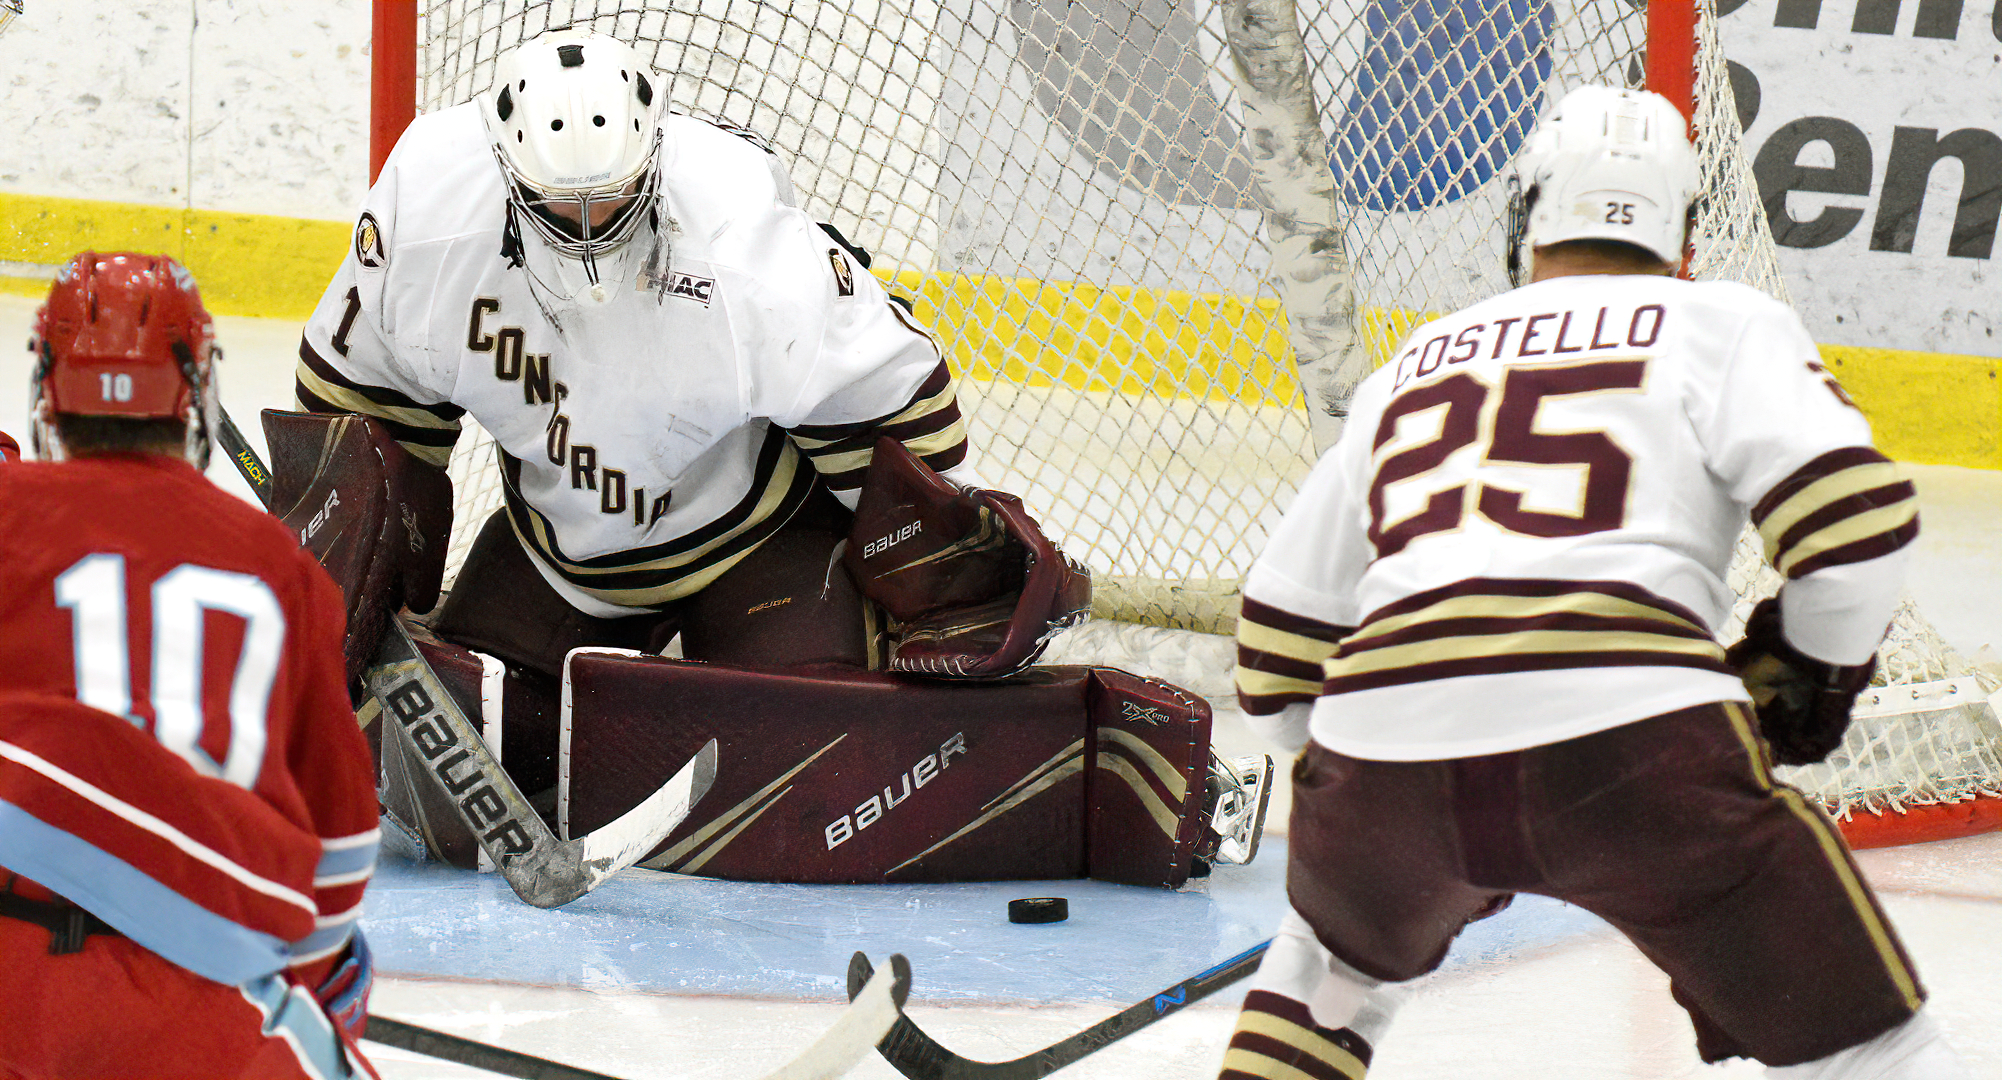 Junior goalie Matt Fitzgerald made a career-high 38 saves in the Cobbers' 3-2 overtime win at Bethel. The win gave CC the sweep of the series.